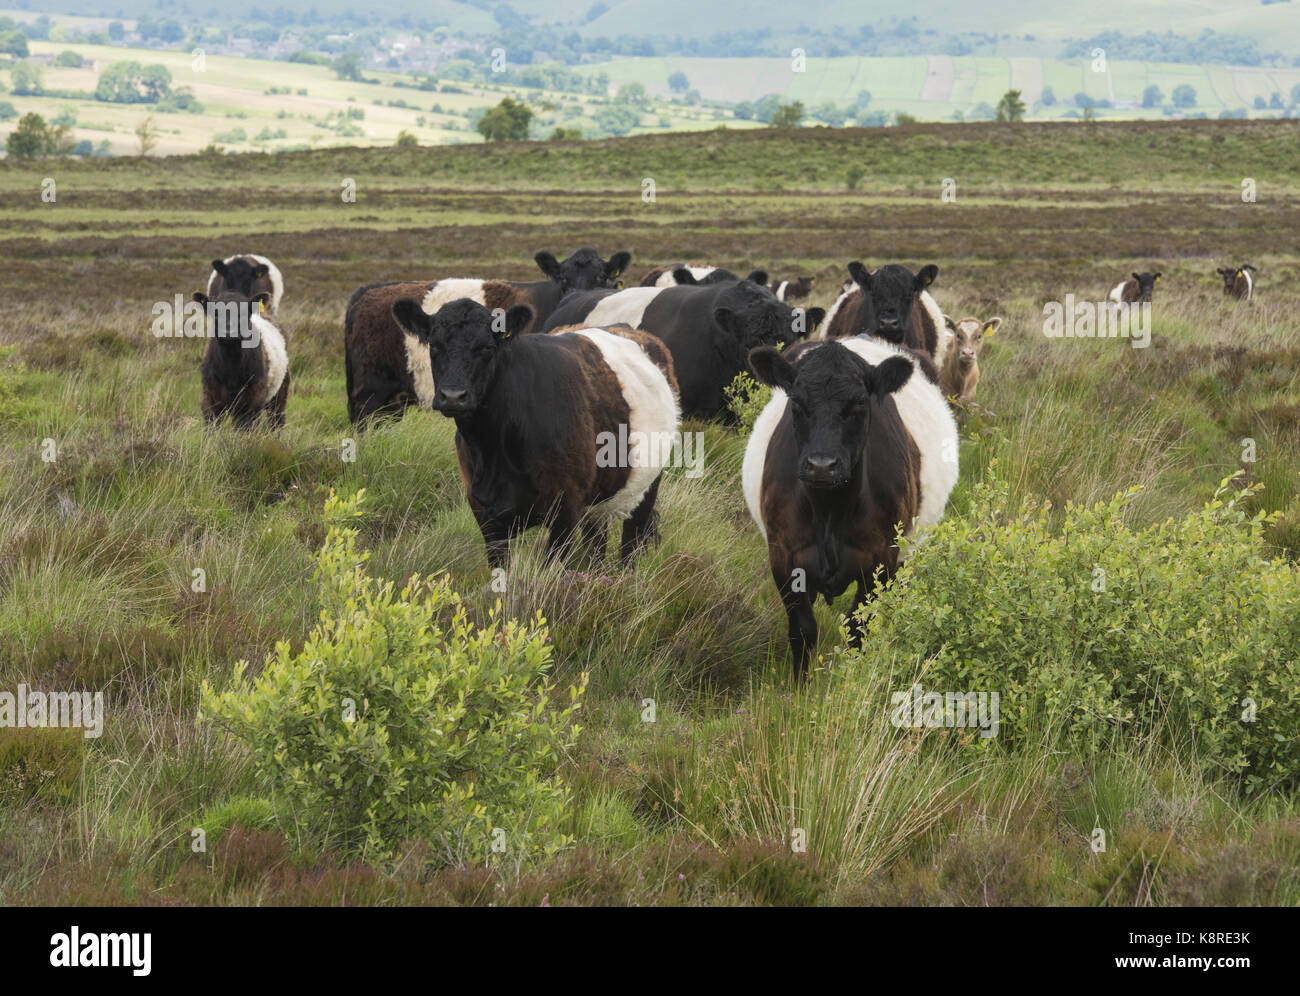 Belted galloway cattle sur avaler moss, North Staffordshire moorland, longnor, Staffordshire. Banque D'Images